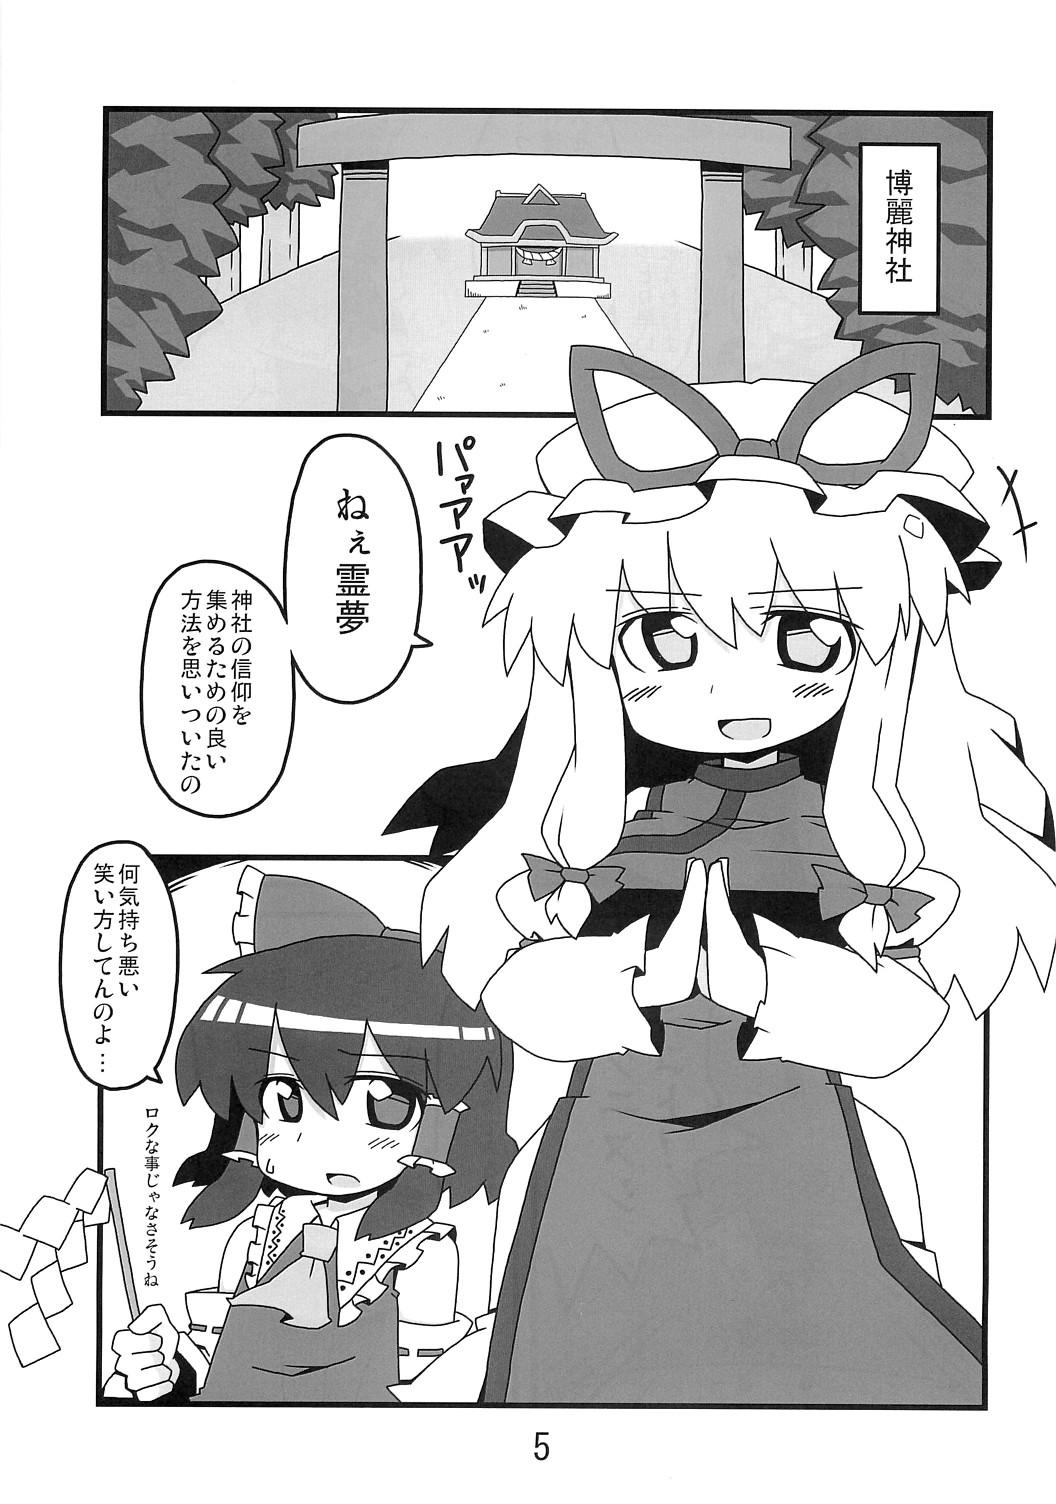 Boy Fuck Girl 東方豊年祭 - Touhou project Spank - Page 4